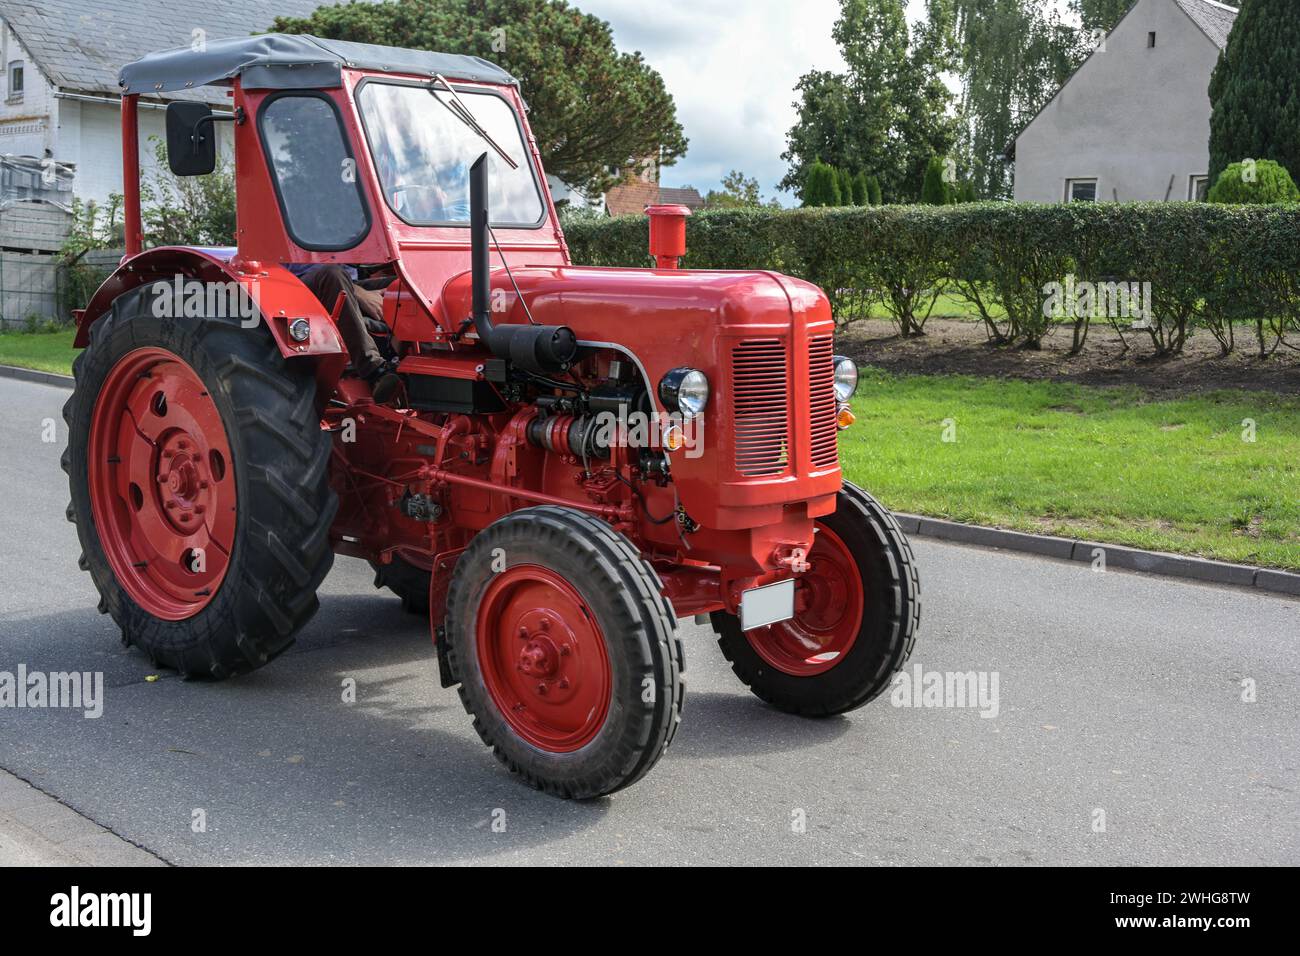 Red vintage tractor, carefully restored oldtimer, driving on the road through the village Stock Photo